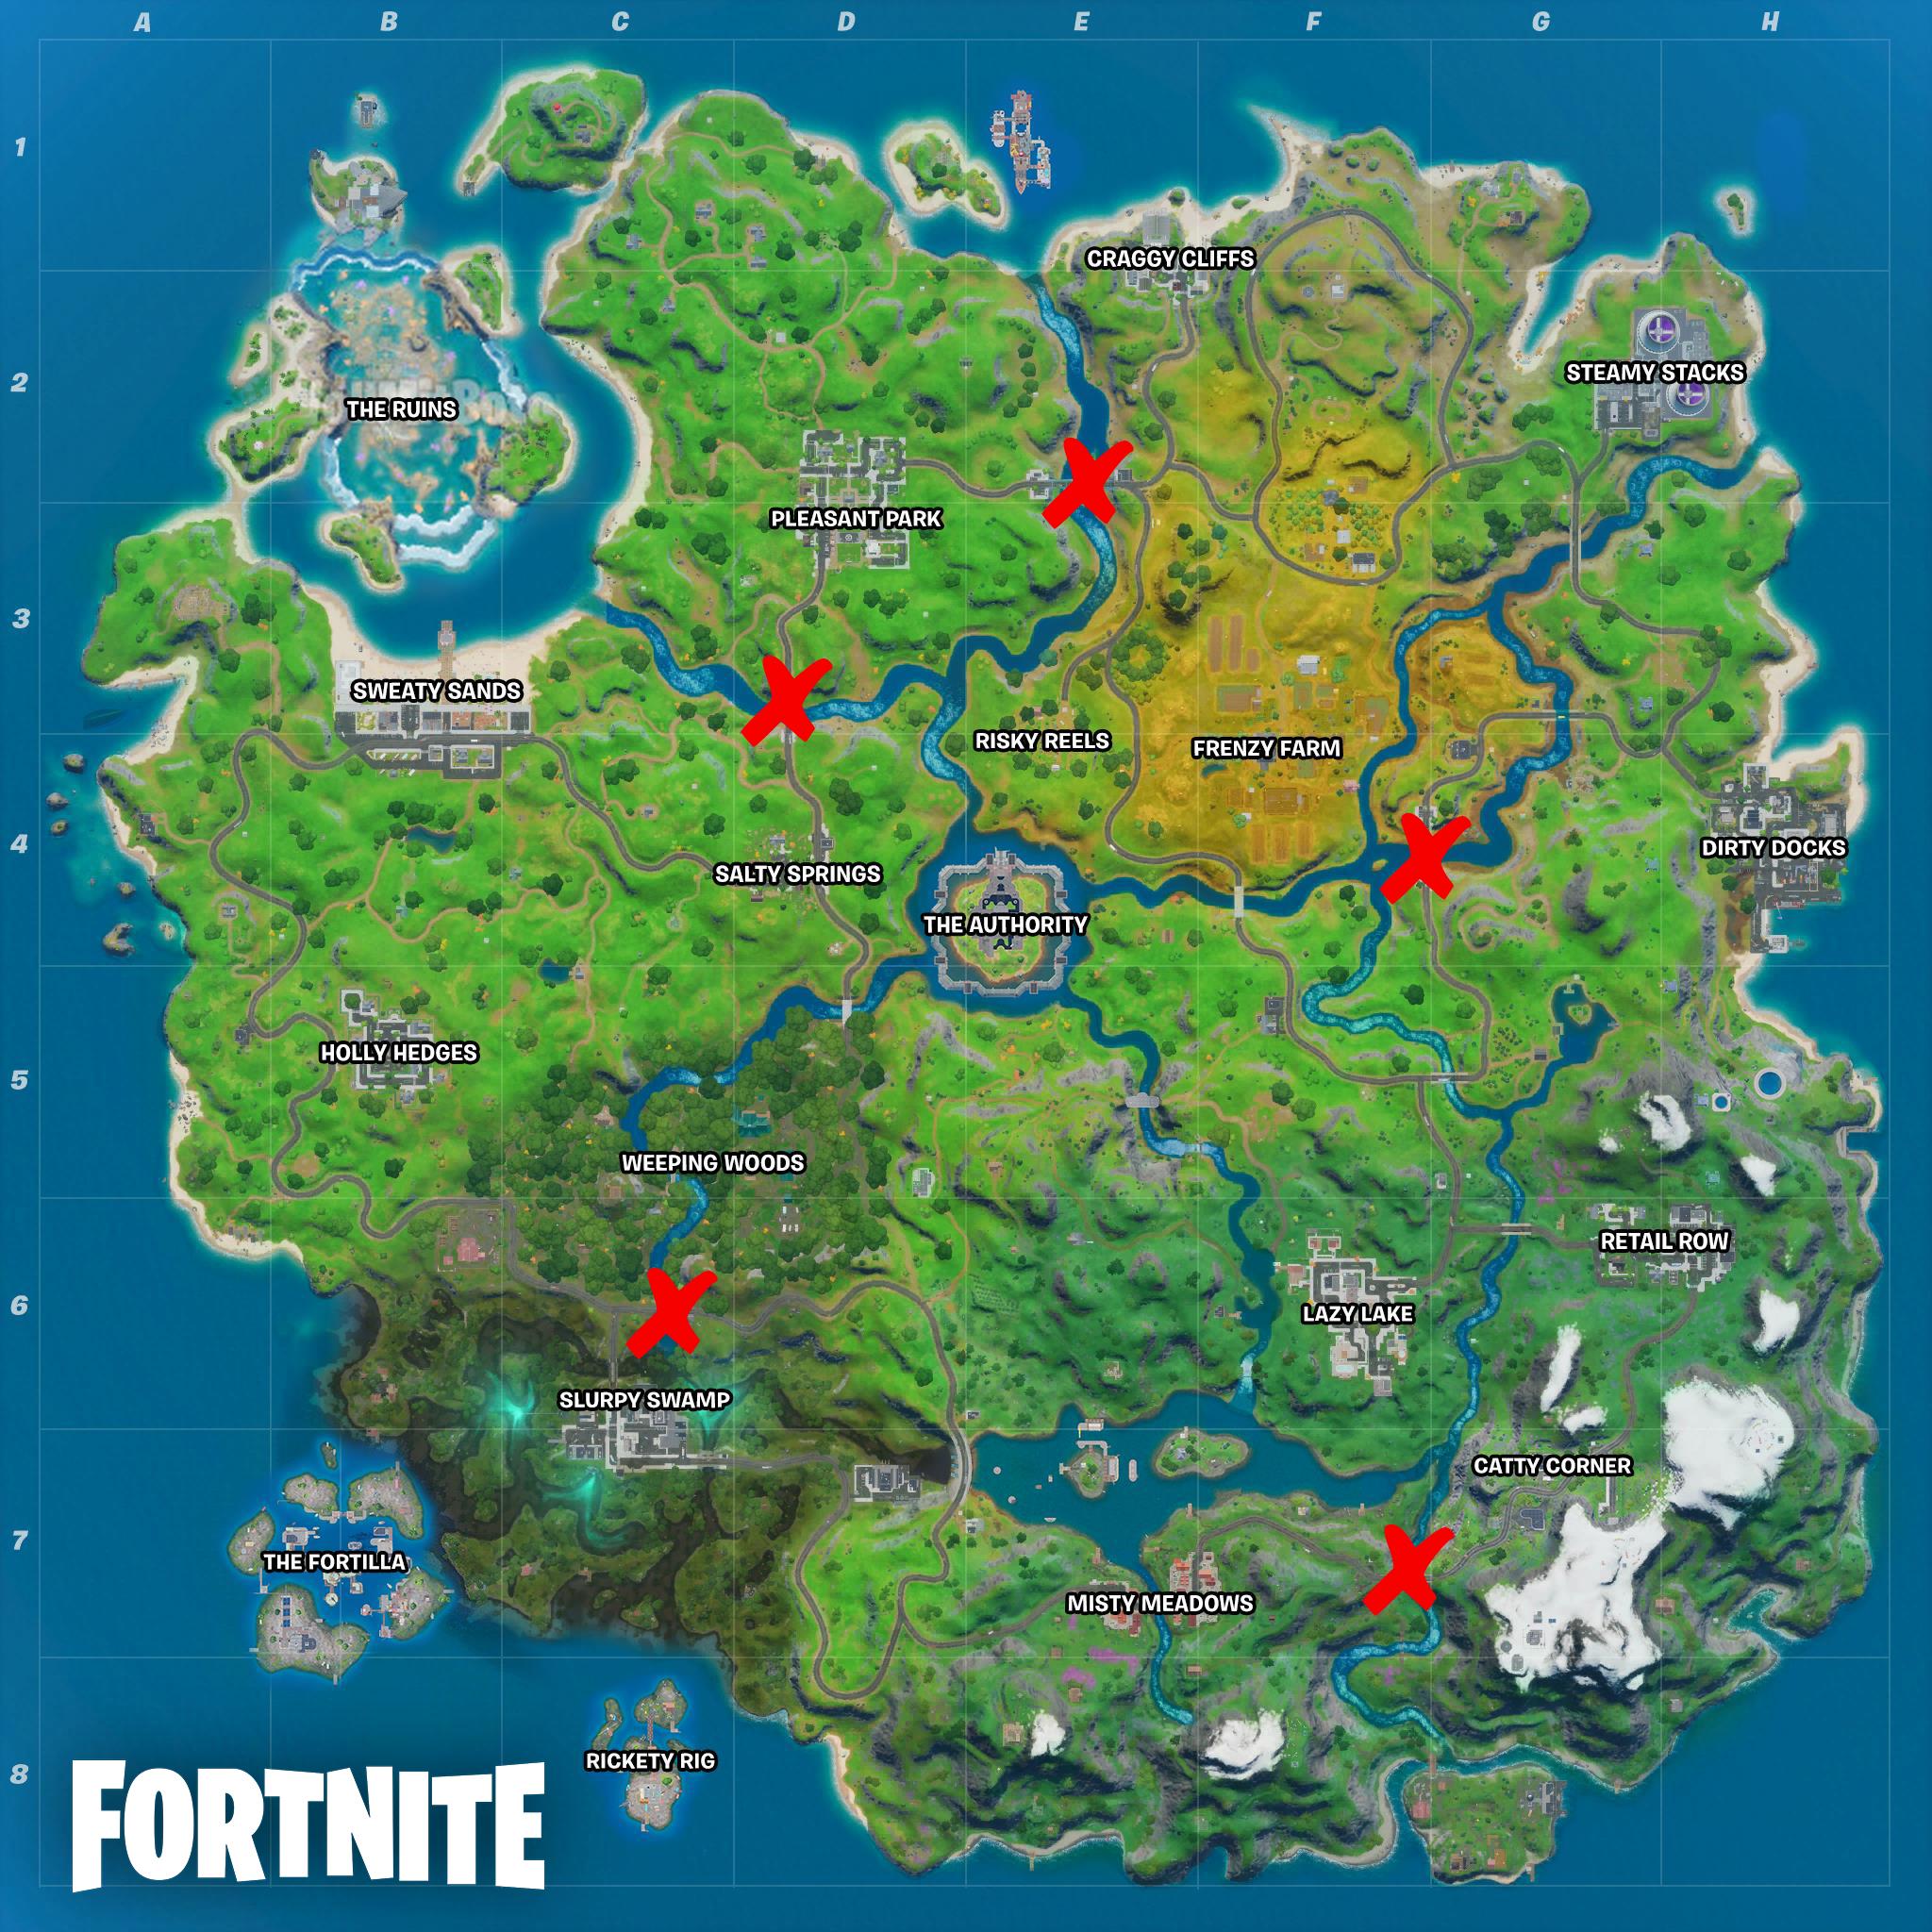 Where to ride motorboats under bridges for Fortnite Week 2 challenges ...